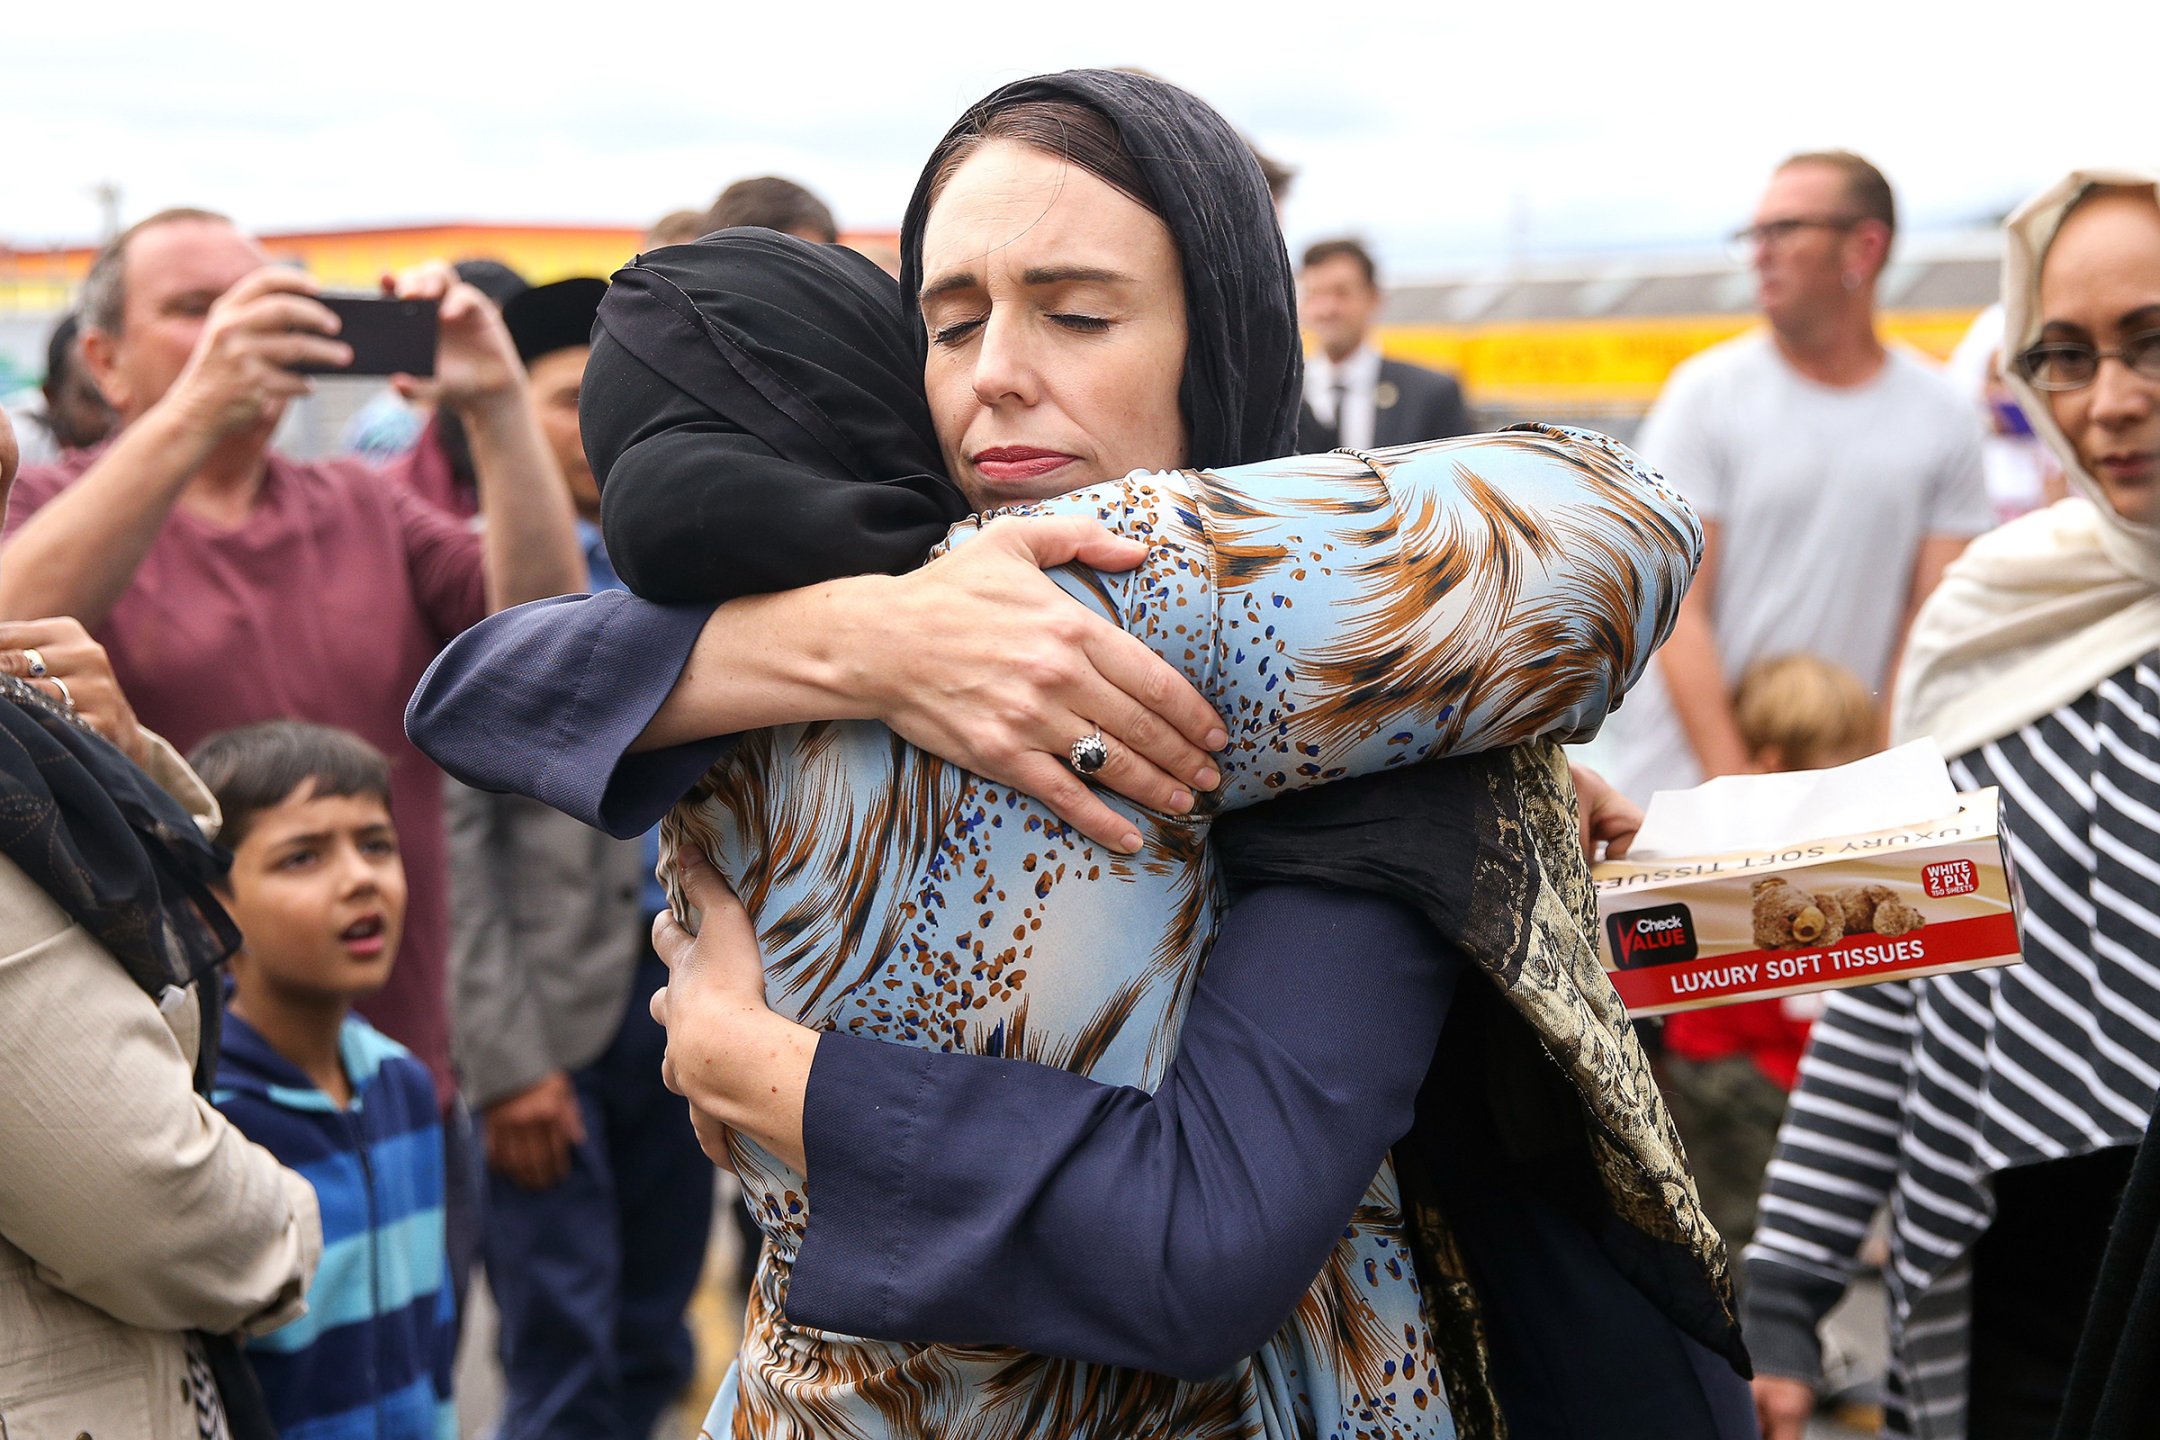 In the wake of the Christchurch attack, New Zealand Prime Minister Jacinda Ardern hugs a mosque-goer at the Kilbirnie Mosque in Wellington on March 17.